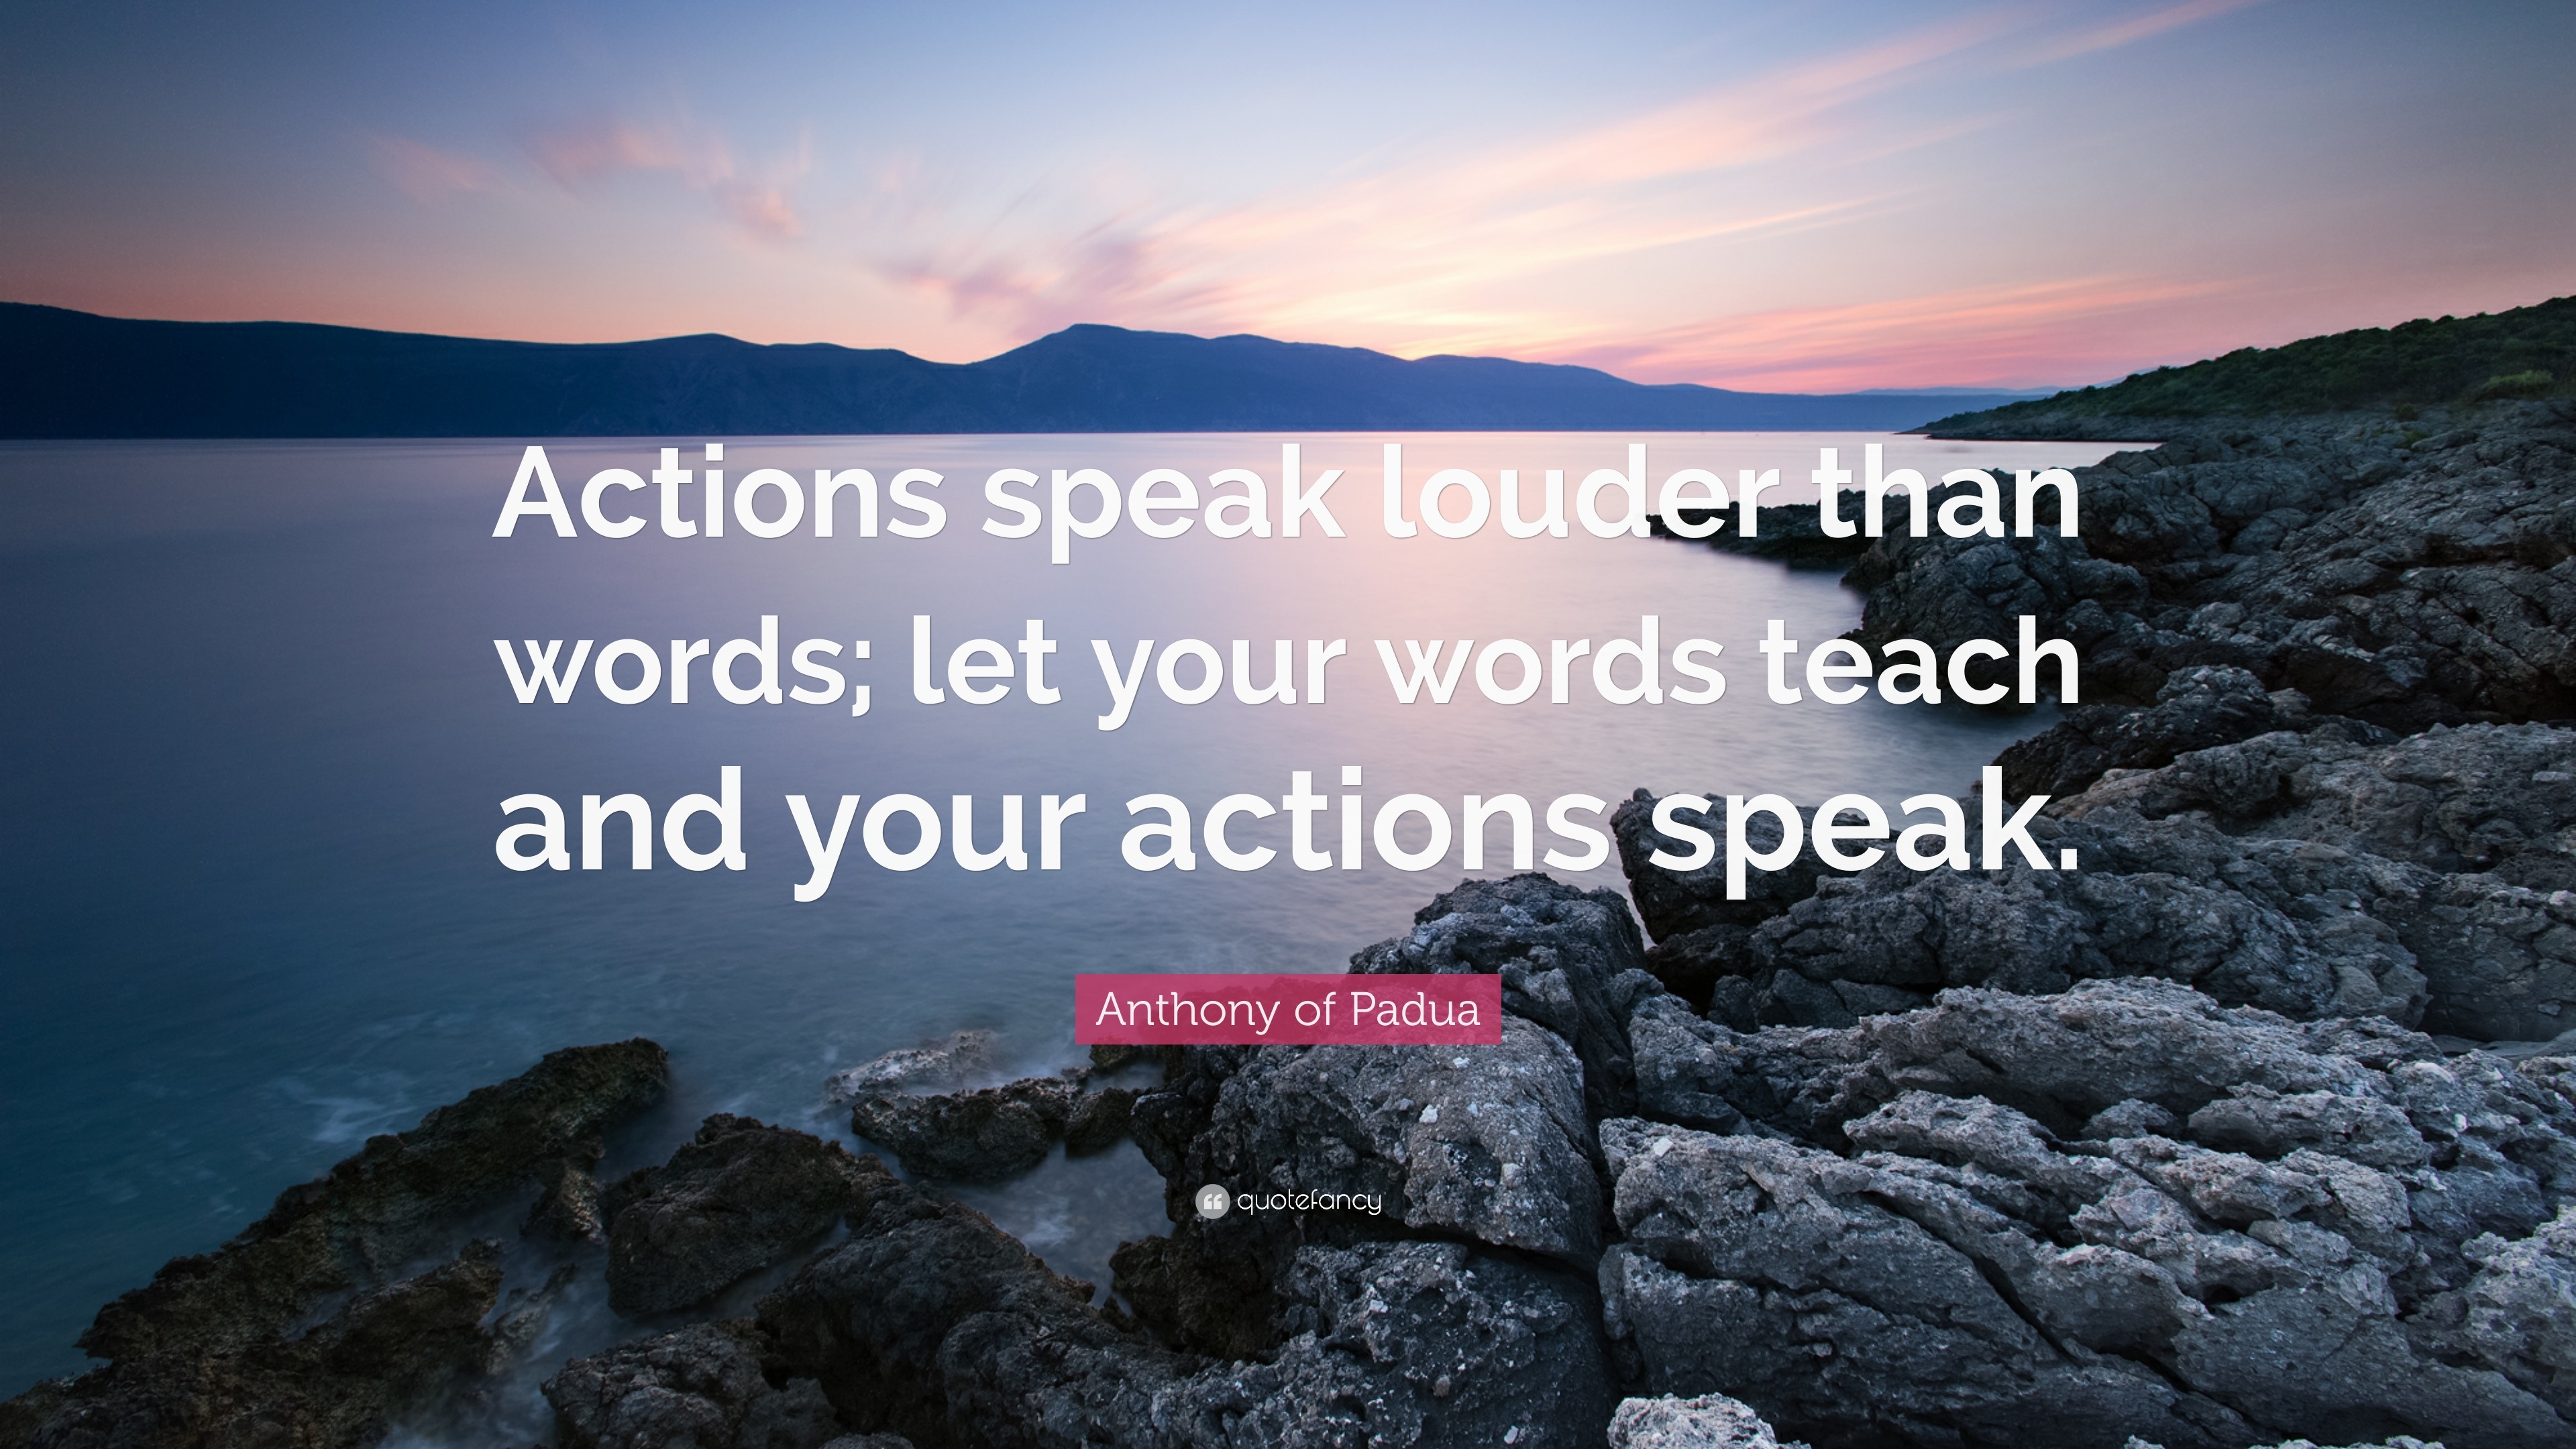 actions are louder than words